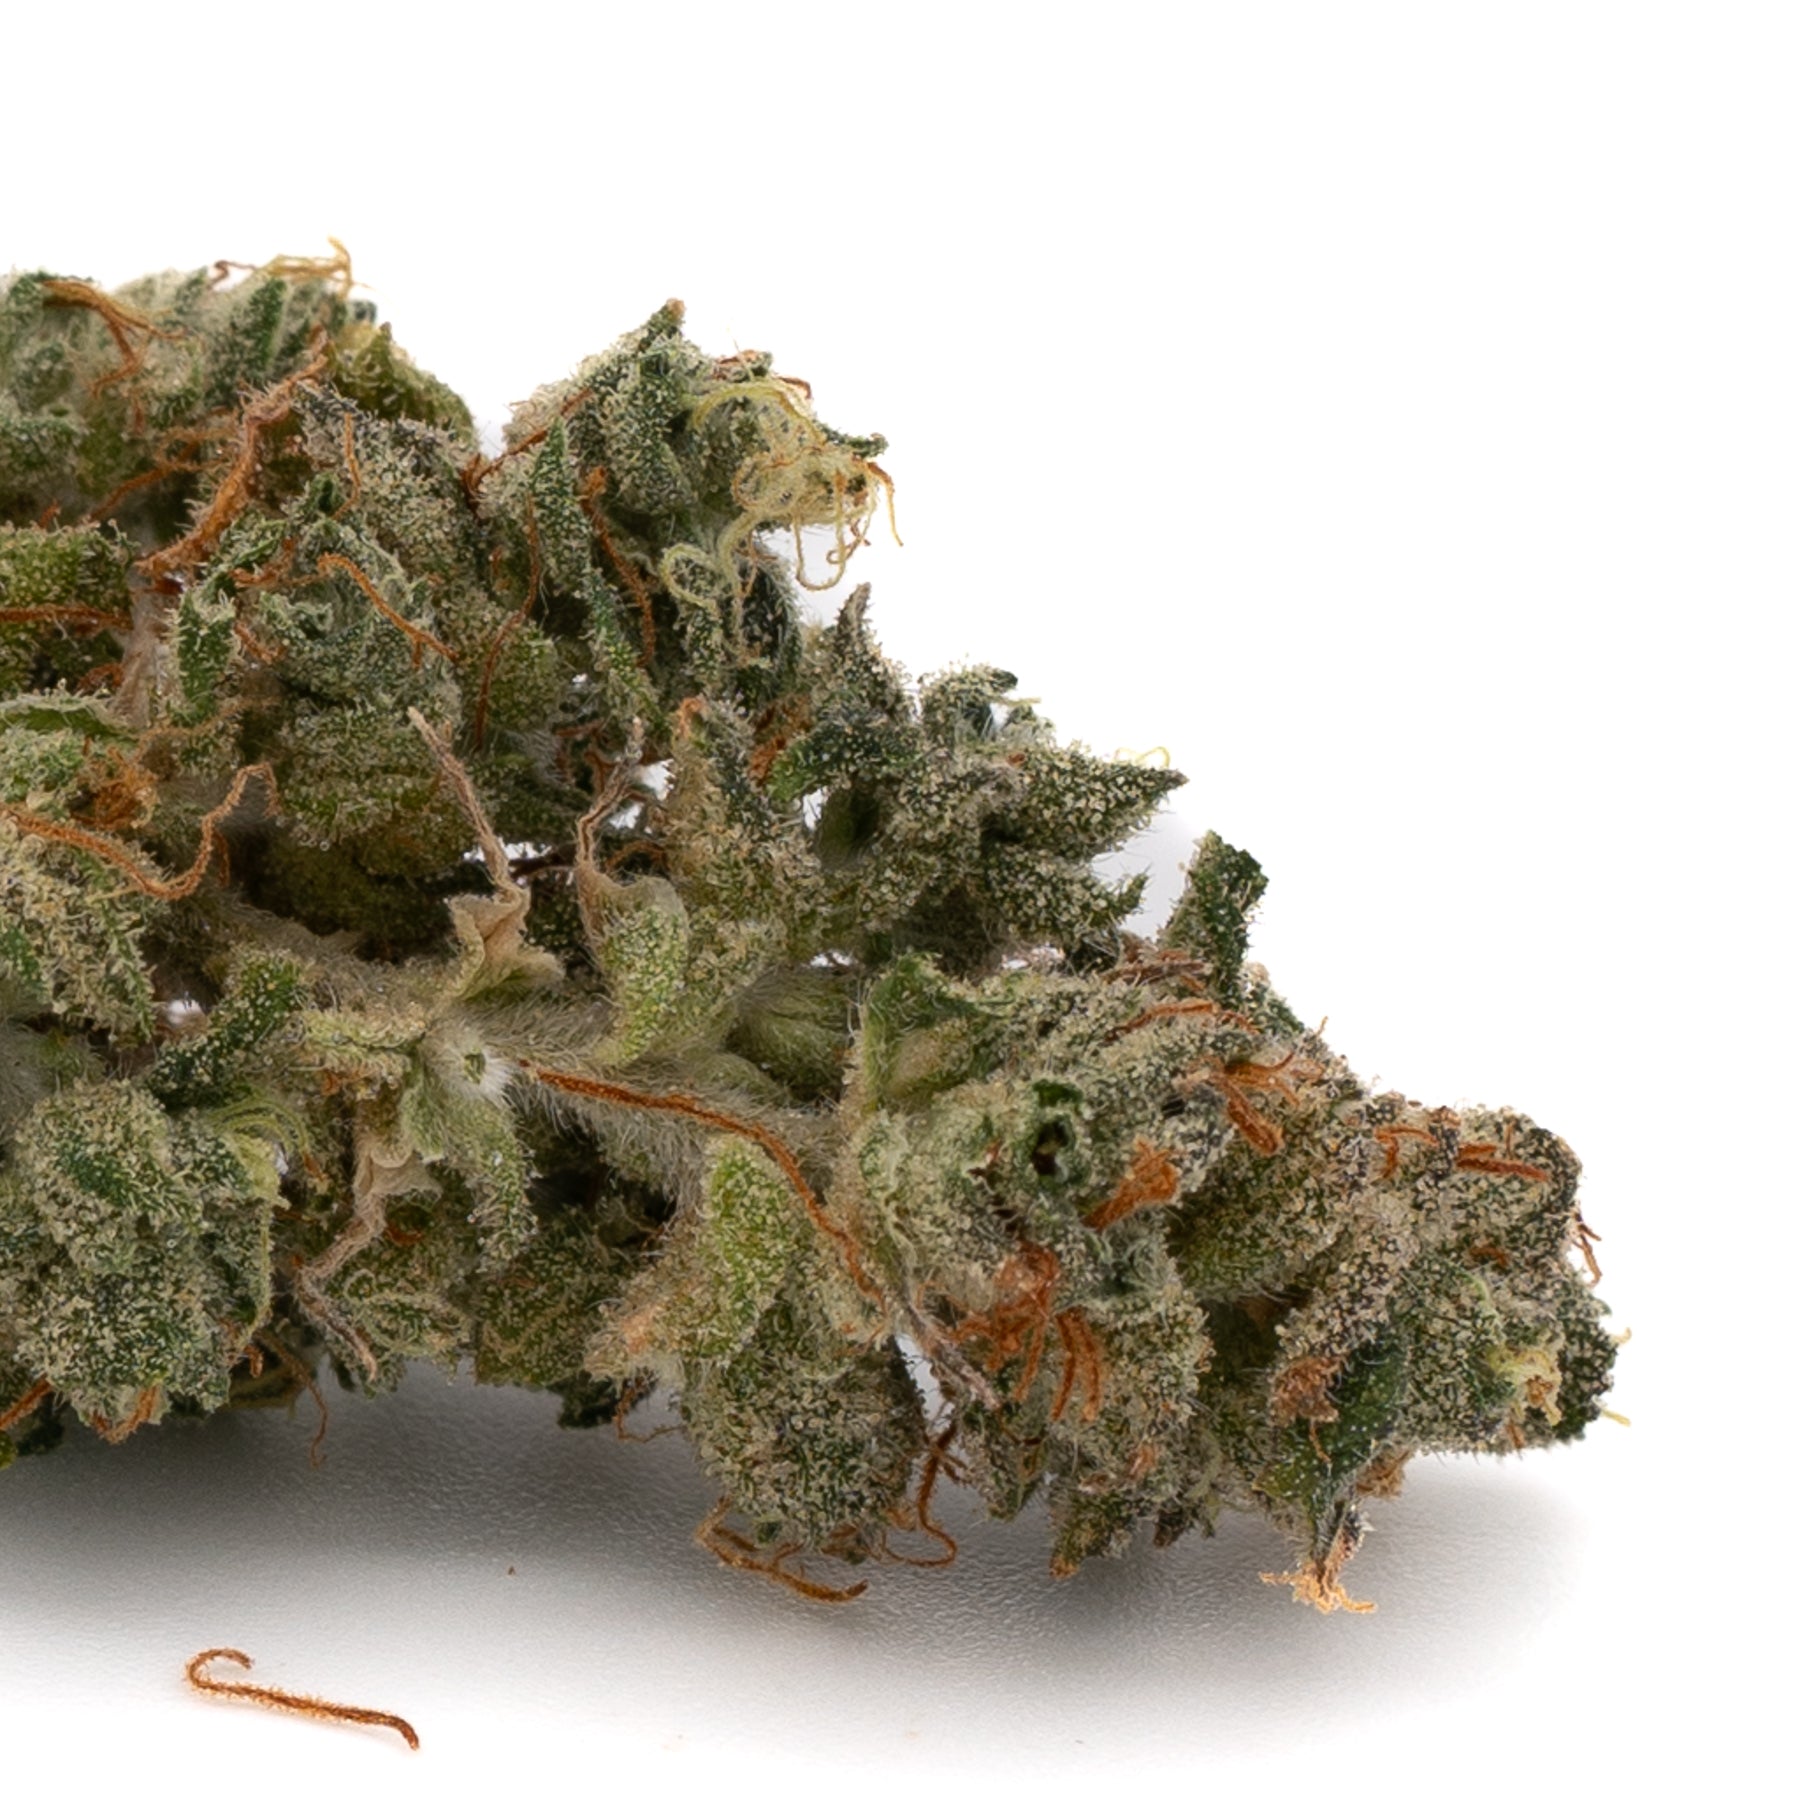 Grape Stank THCa Indoor Flower, a pungent hybrid cannabis strain that encapsulates the epitome of excellence. 